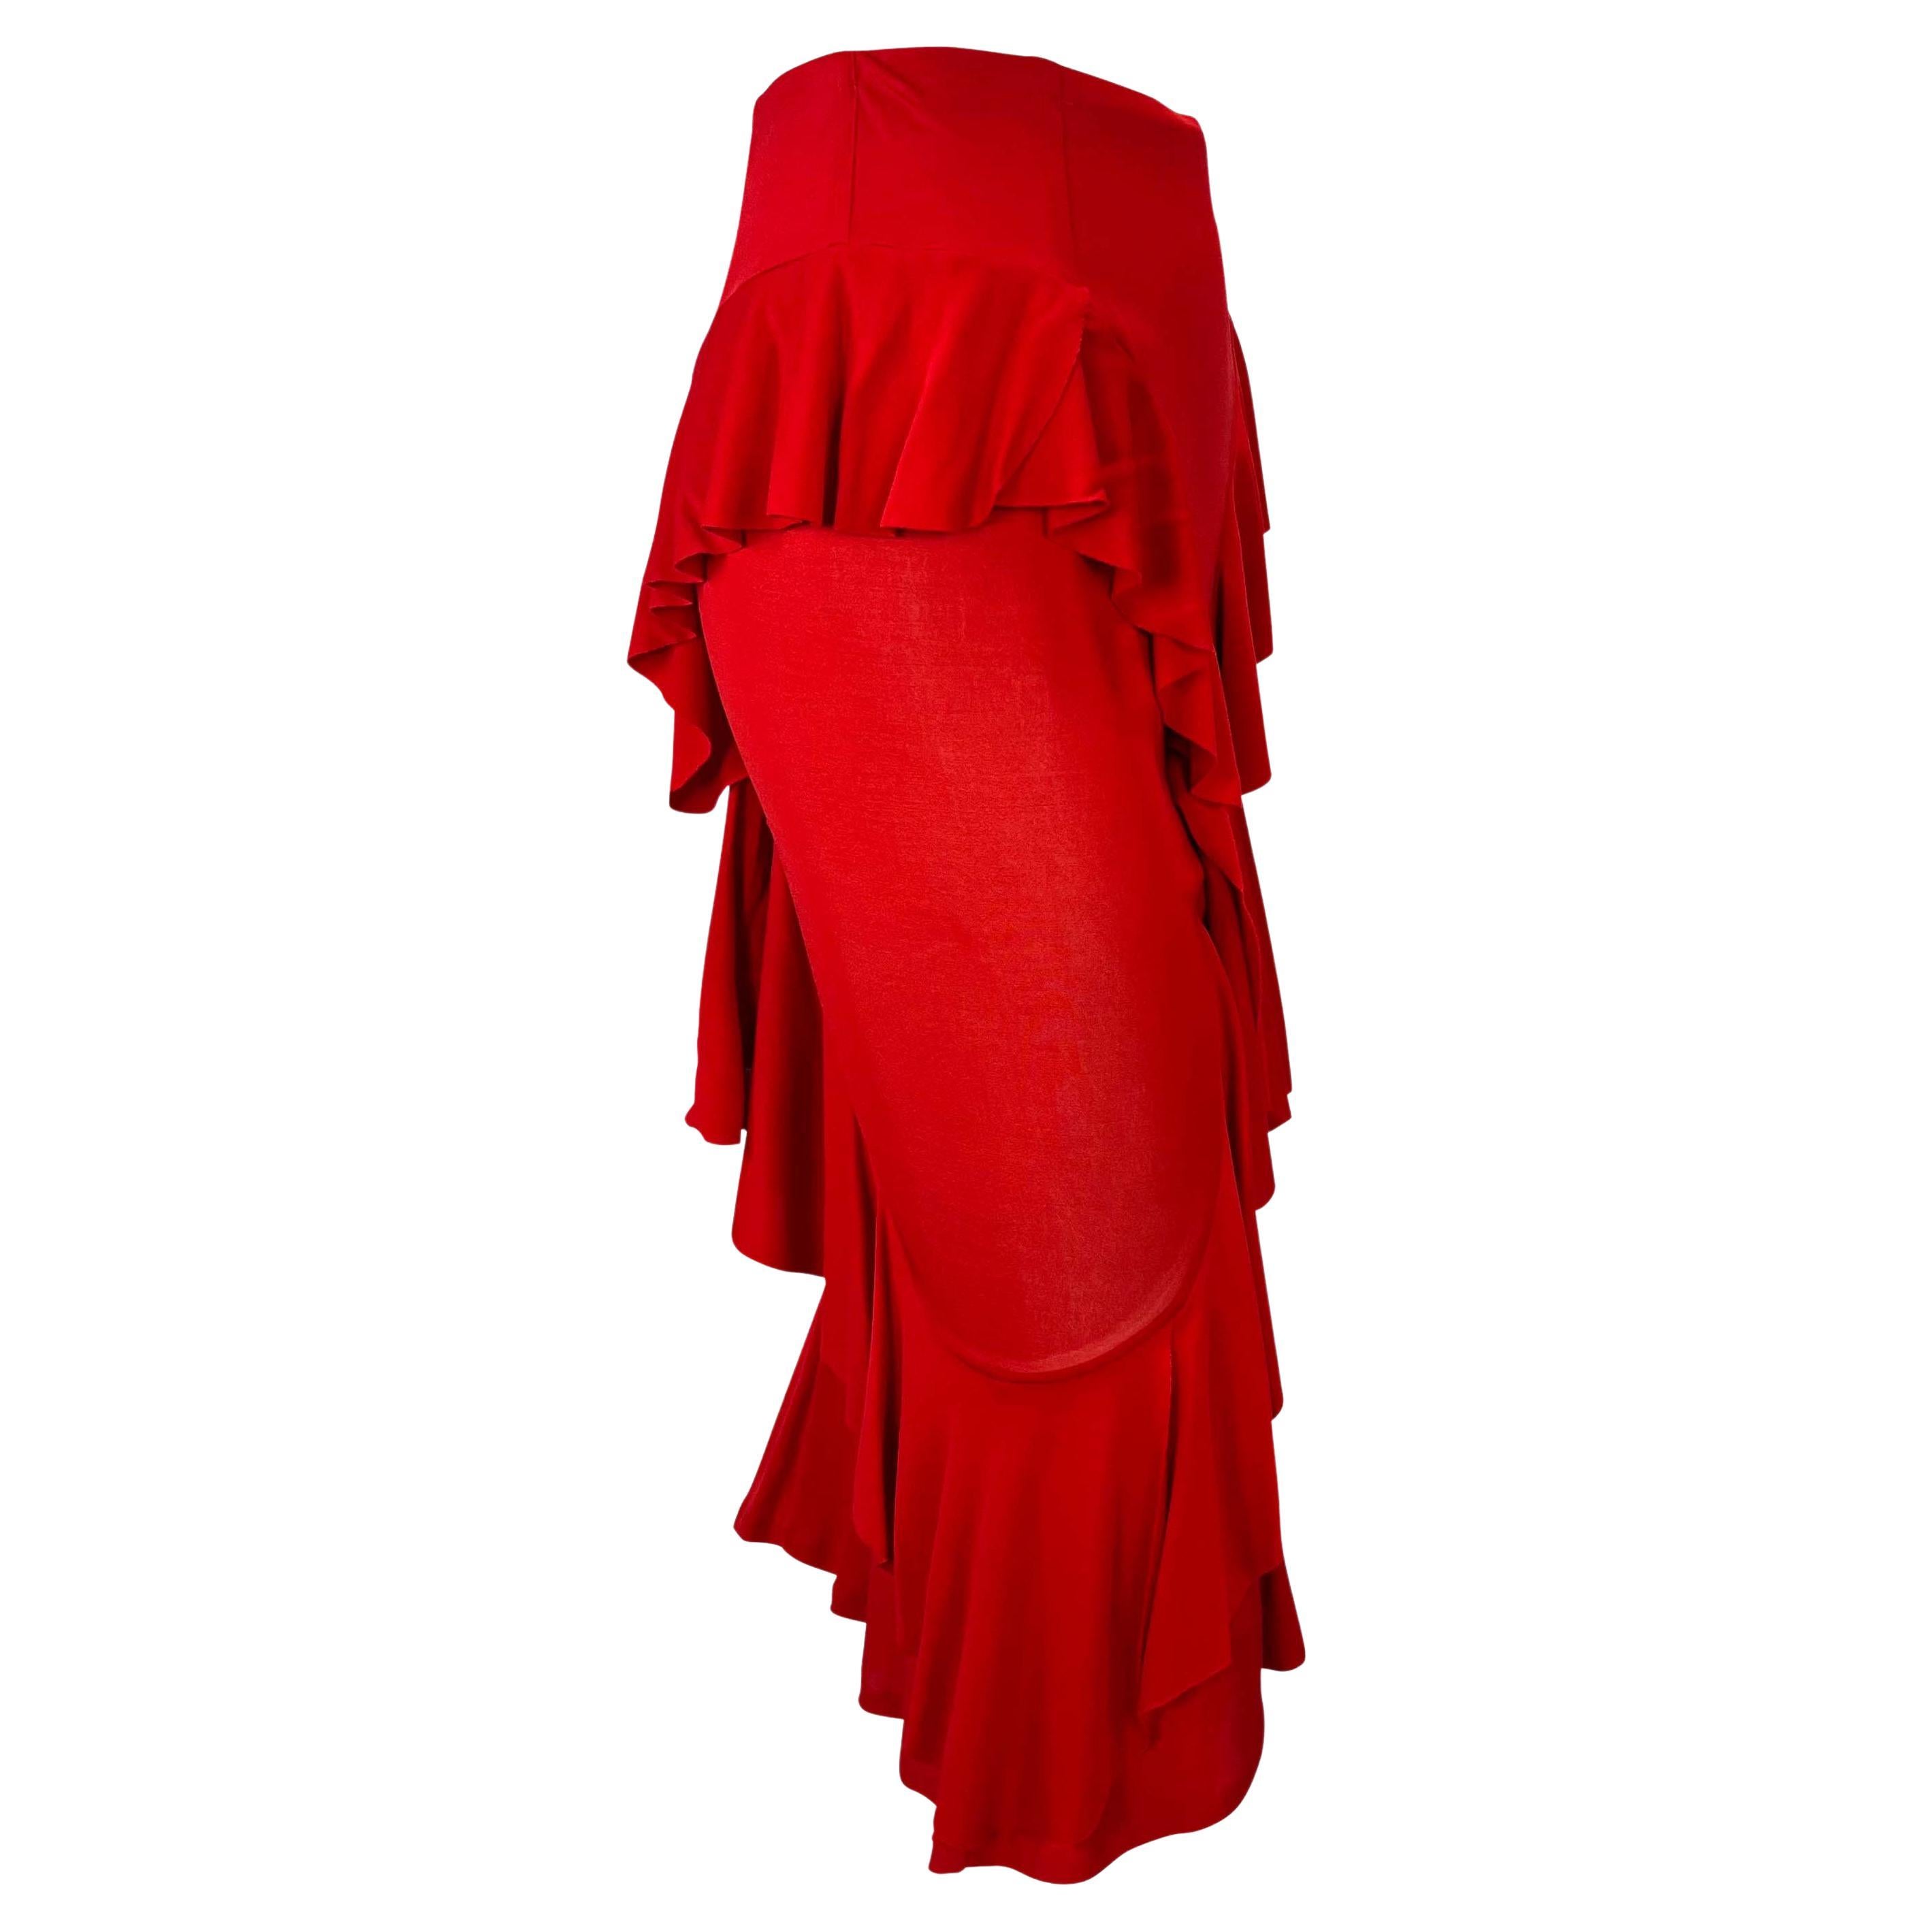 Women's F/W 2003 Yves Saint Laurent by Tom Ford Red Stretch Sheer Ruffle Skirt For Sale